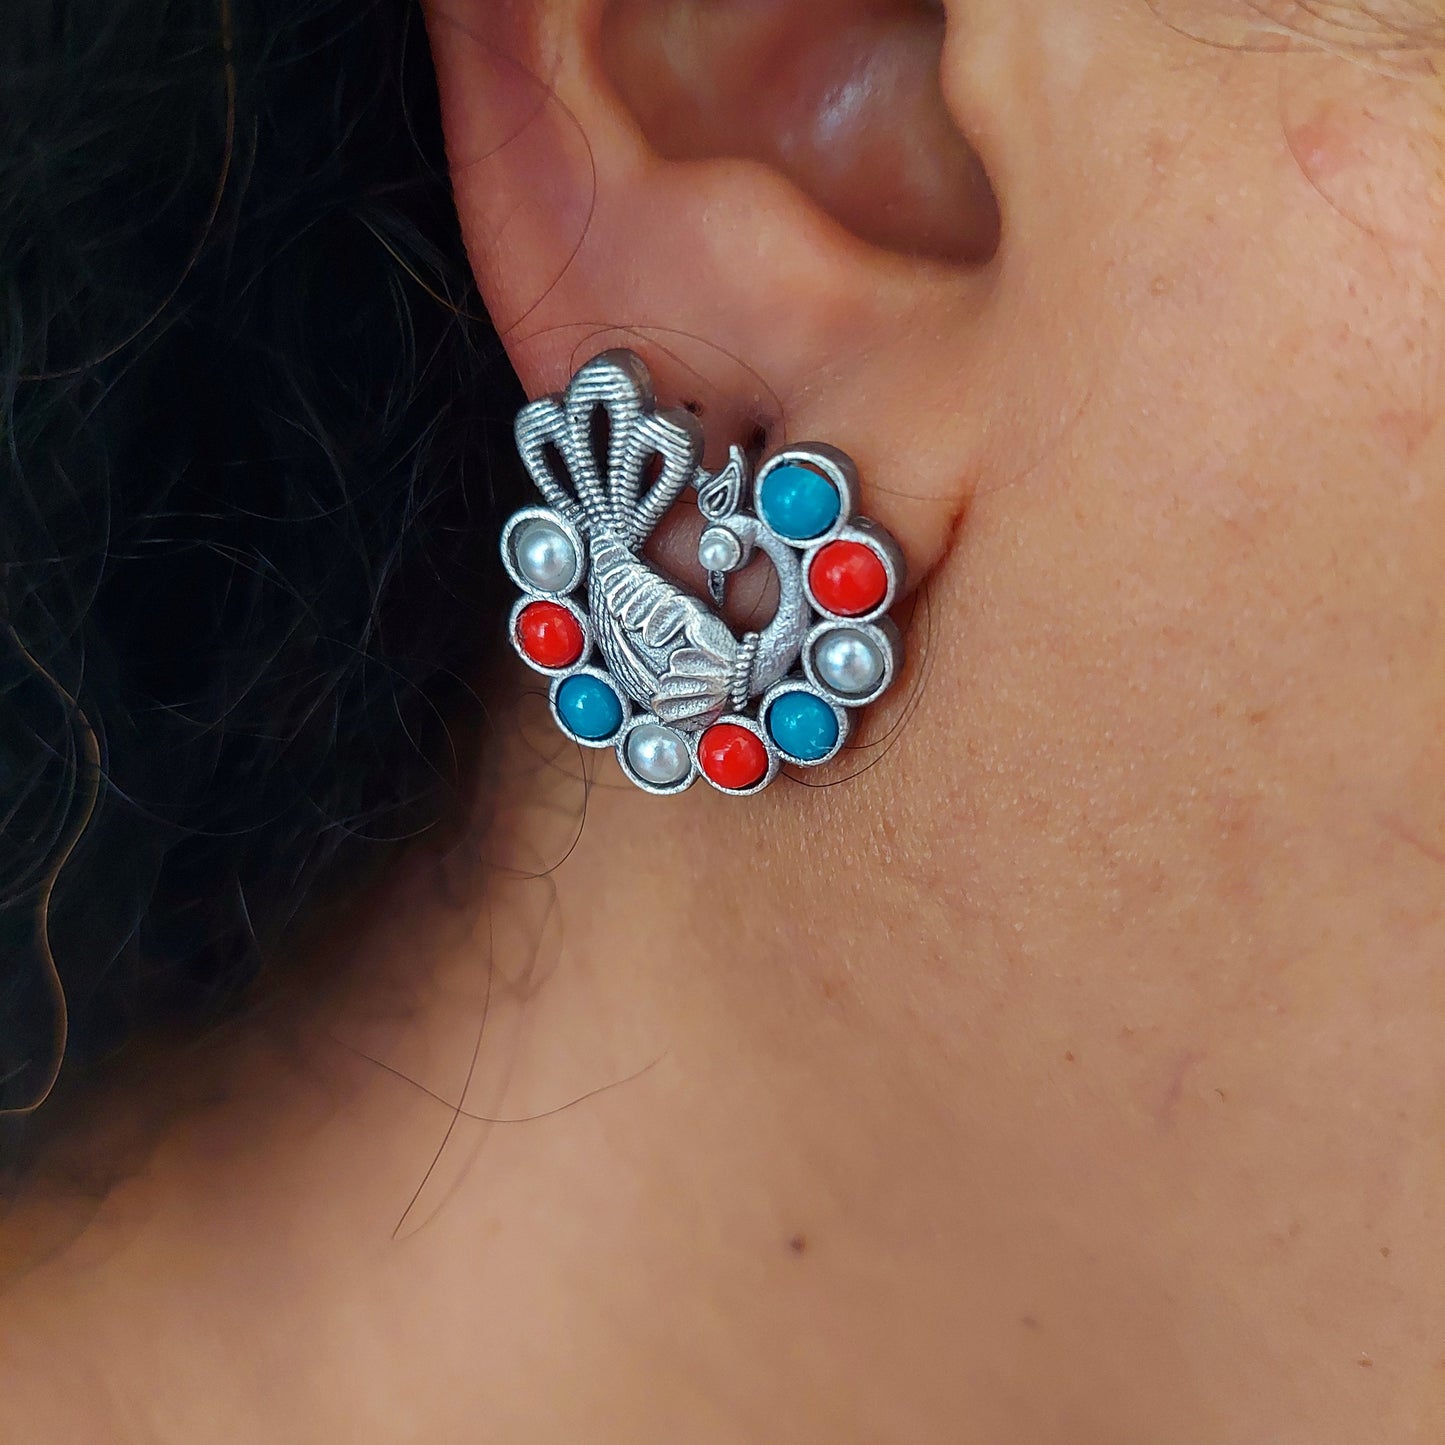 Beautiful Stone Studded Peacock Silver Look Alike Studs - Turqouise Coral and Pearl